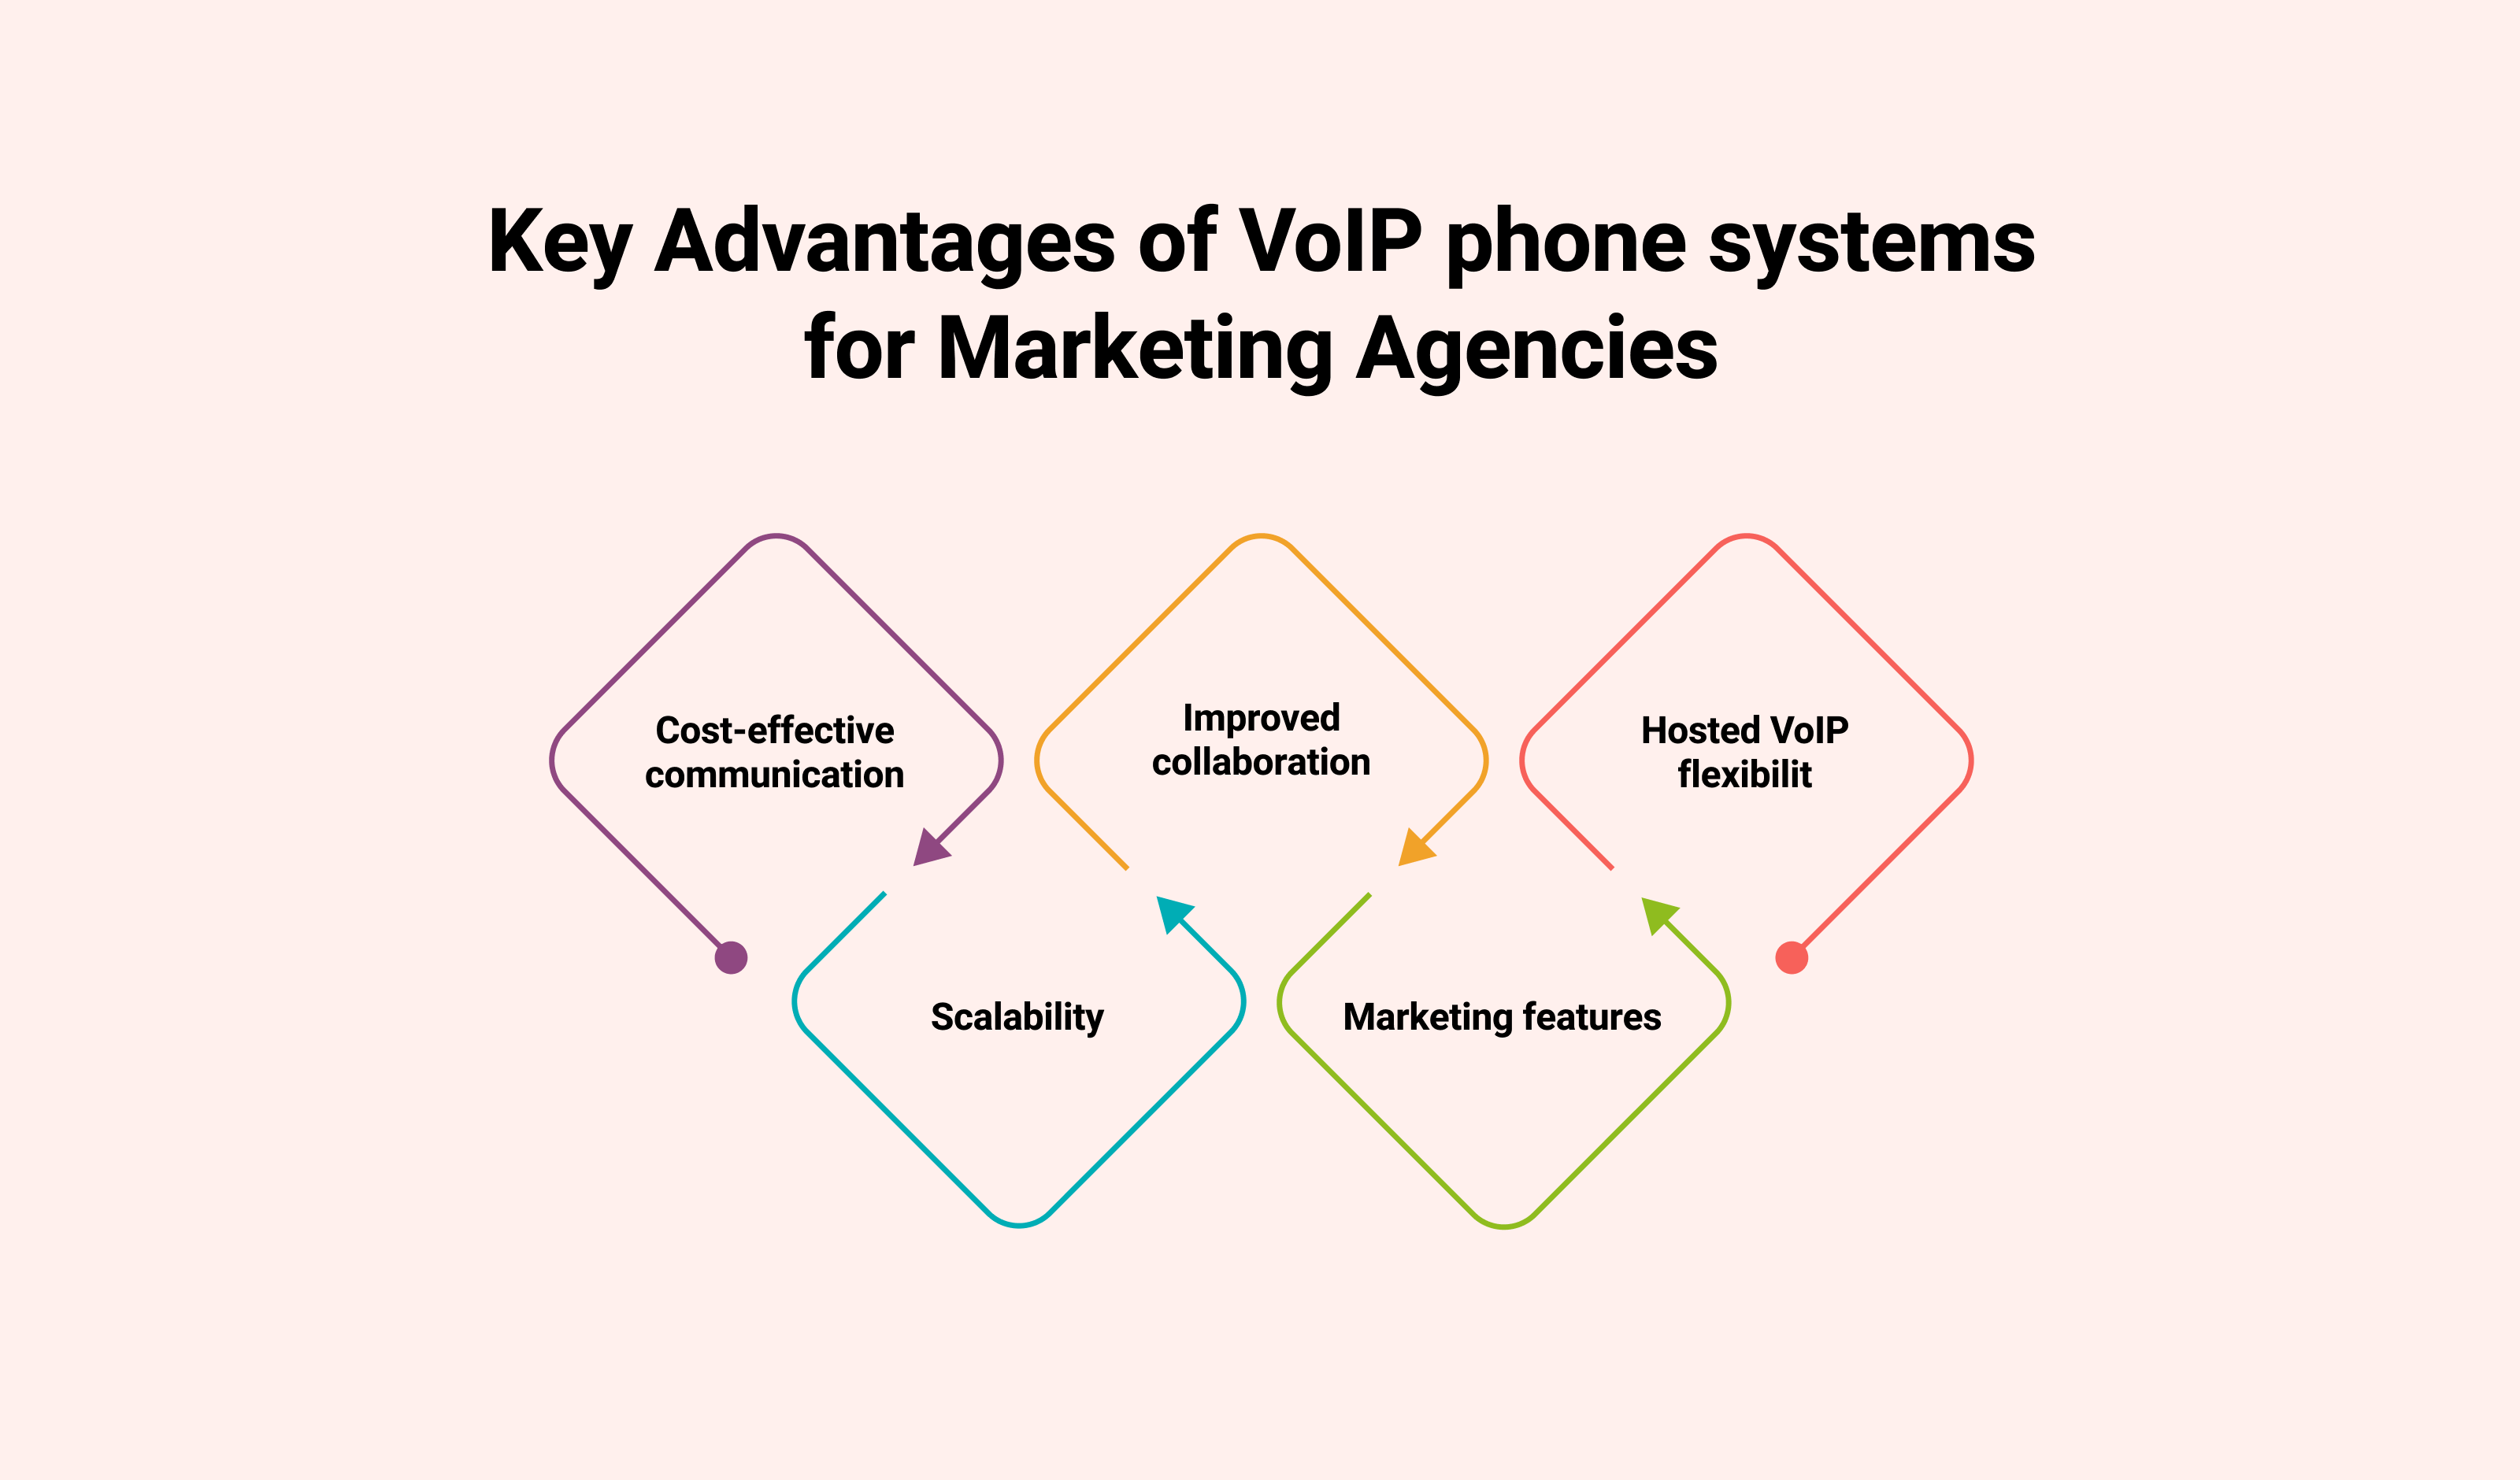 Key Advantages of VoIP Phone Systems for Marketing Agencies: